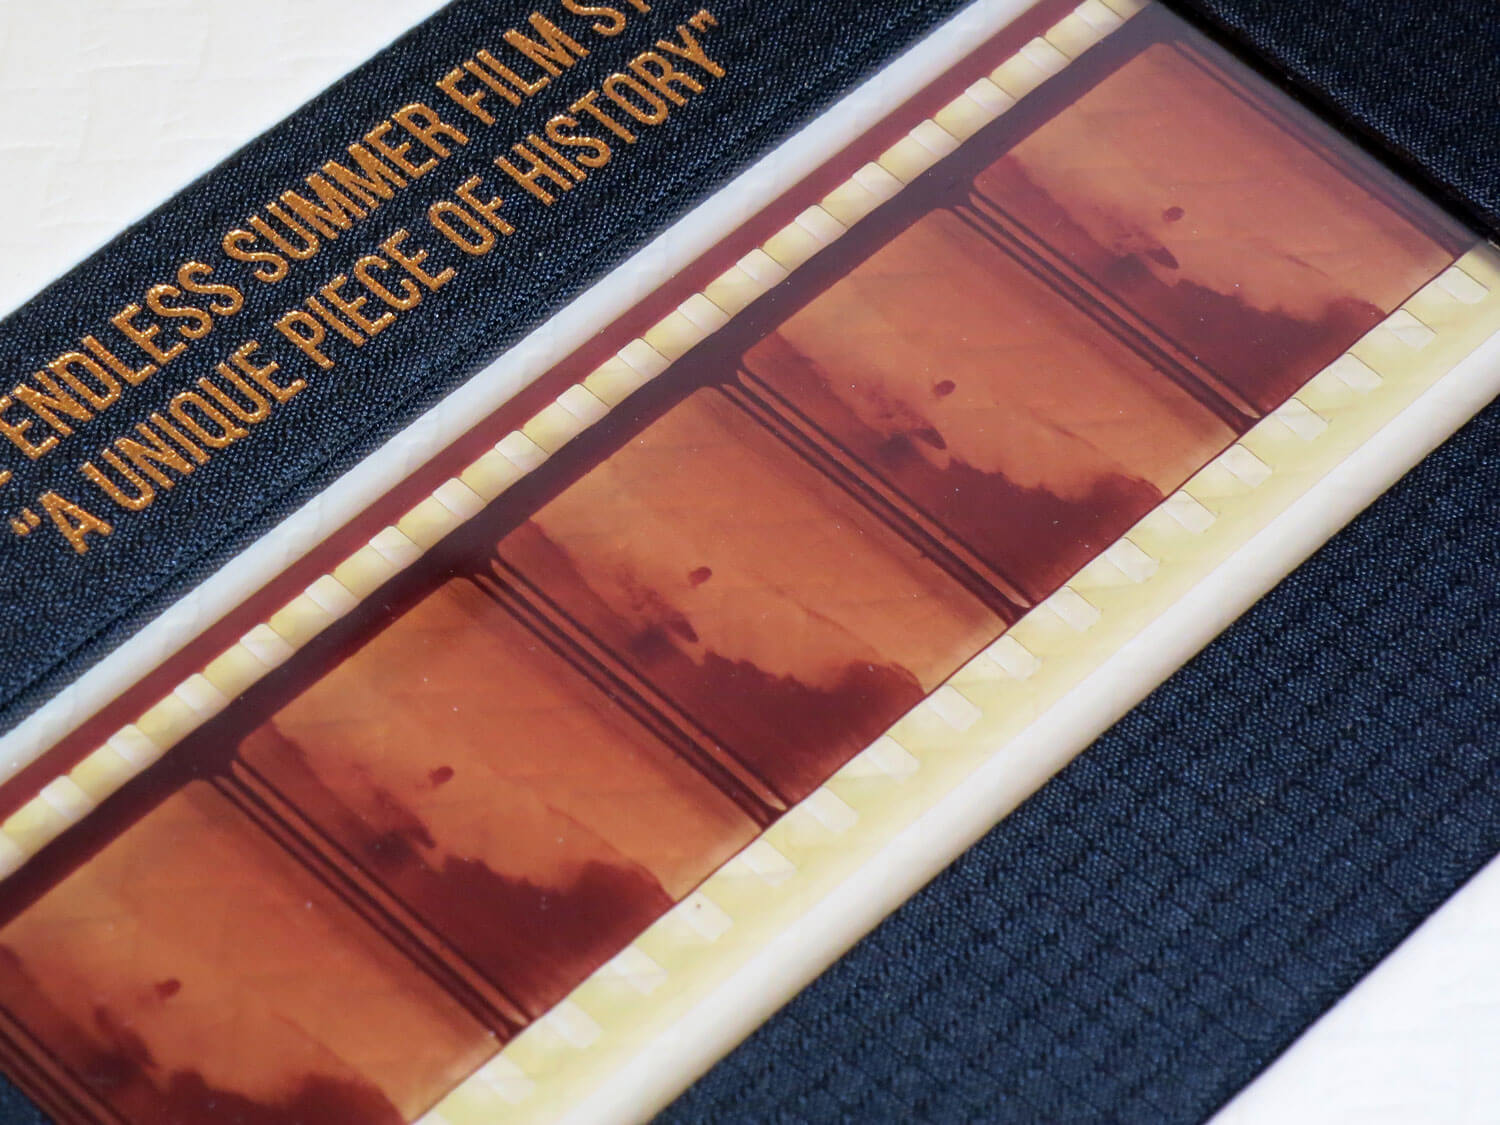 The Endless Summer Limited Edition Book & Box Set